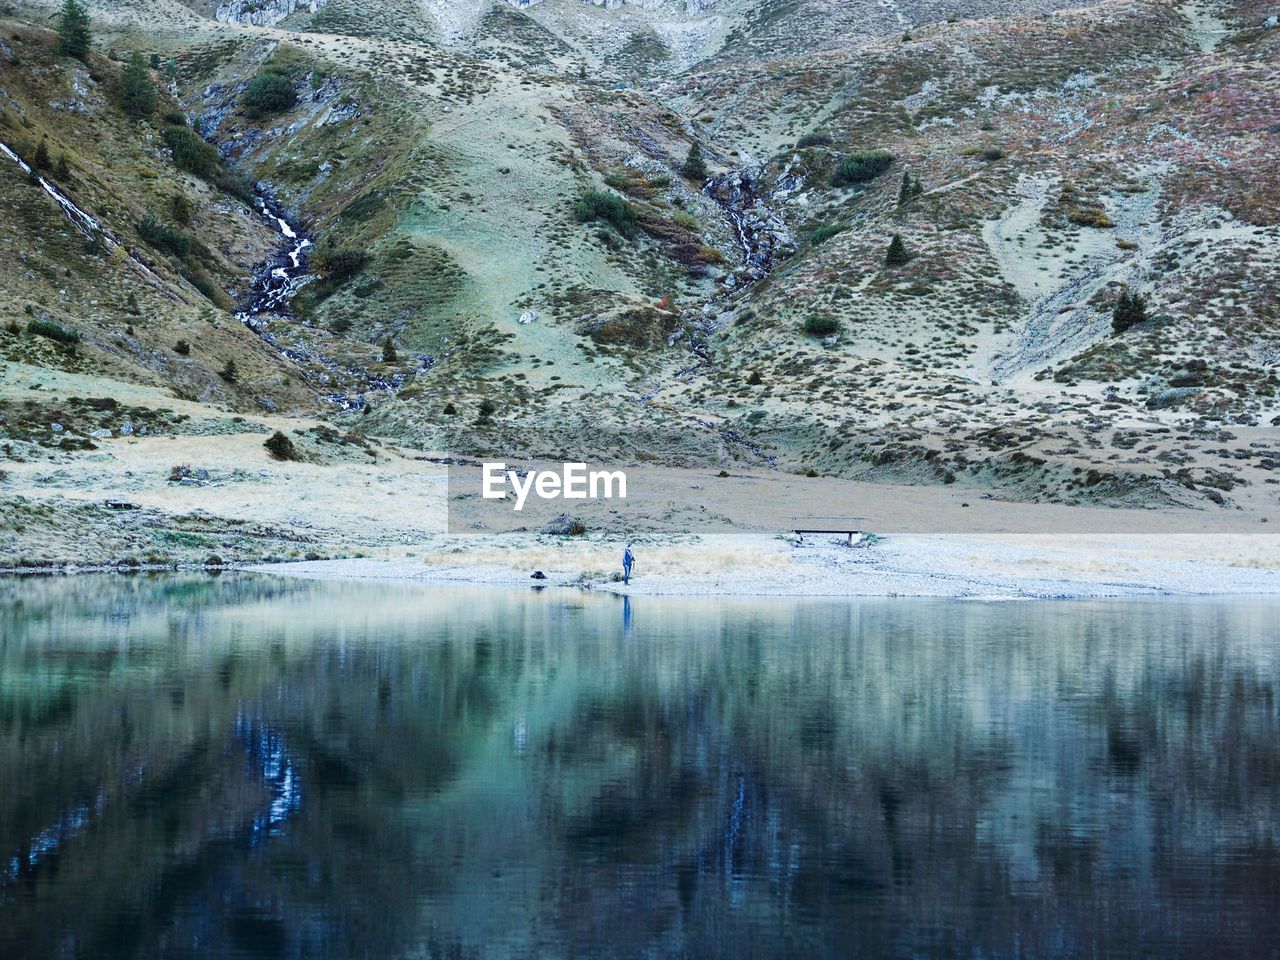 Reflection of mountain in water